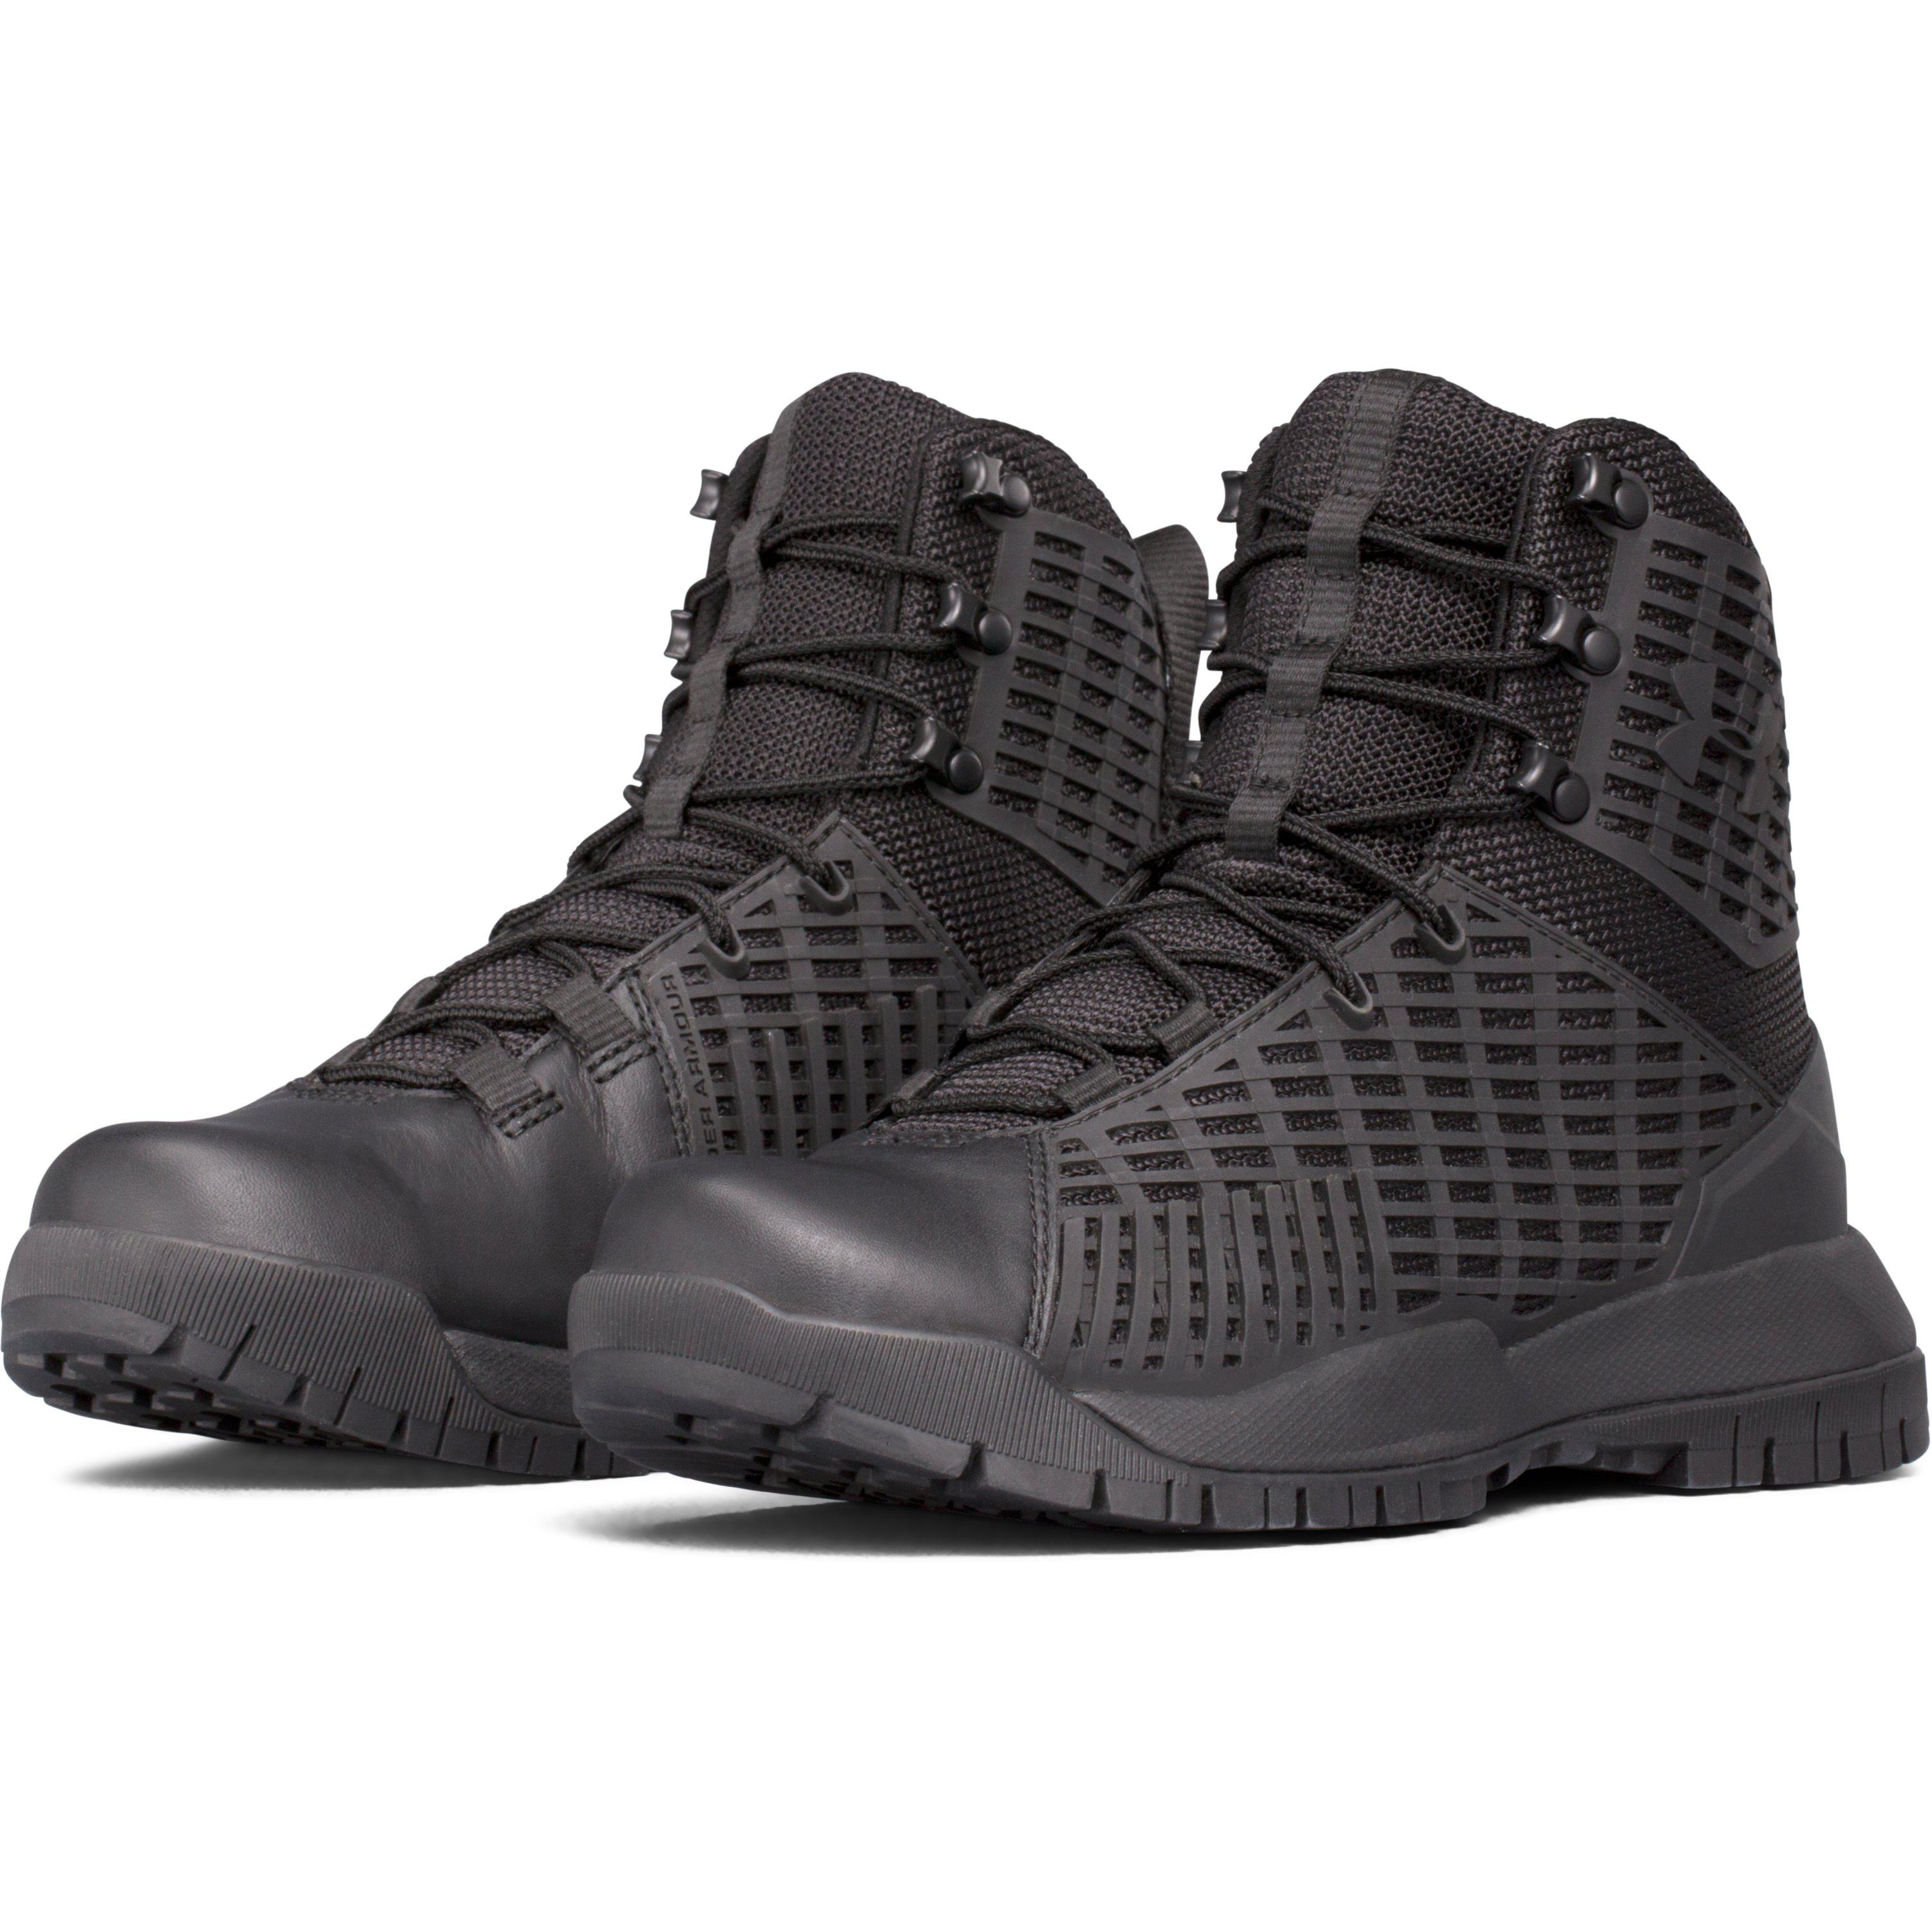 Under Armour Stryker Boots | lupon.gov.ph